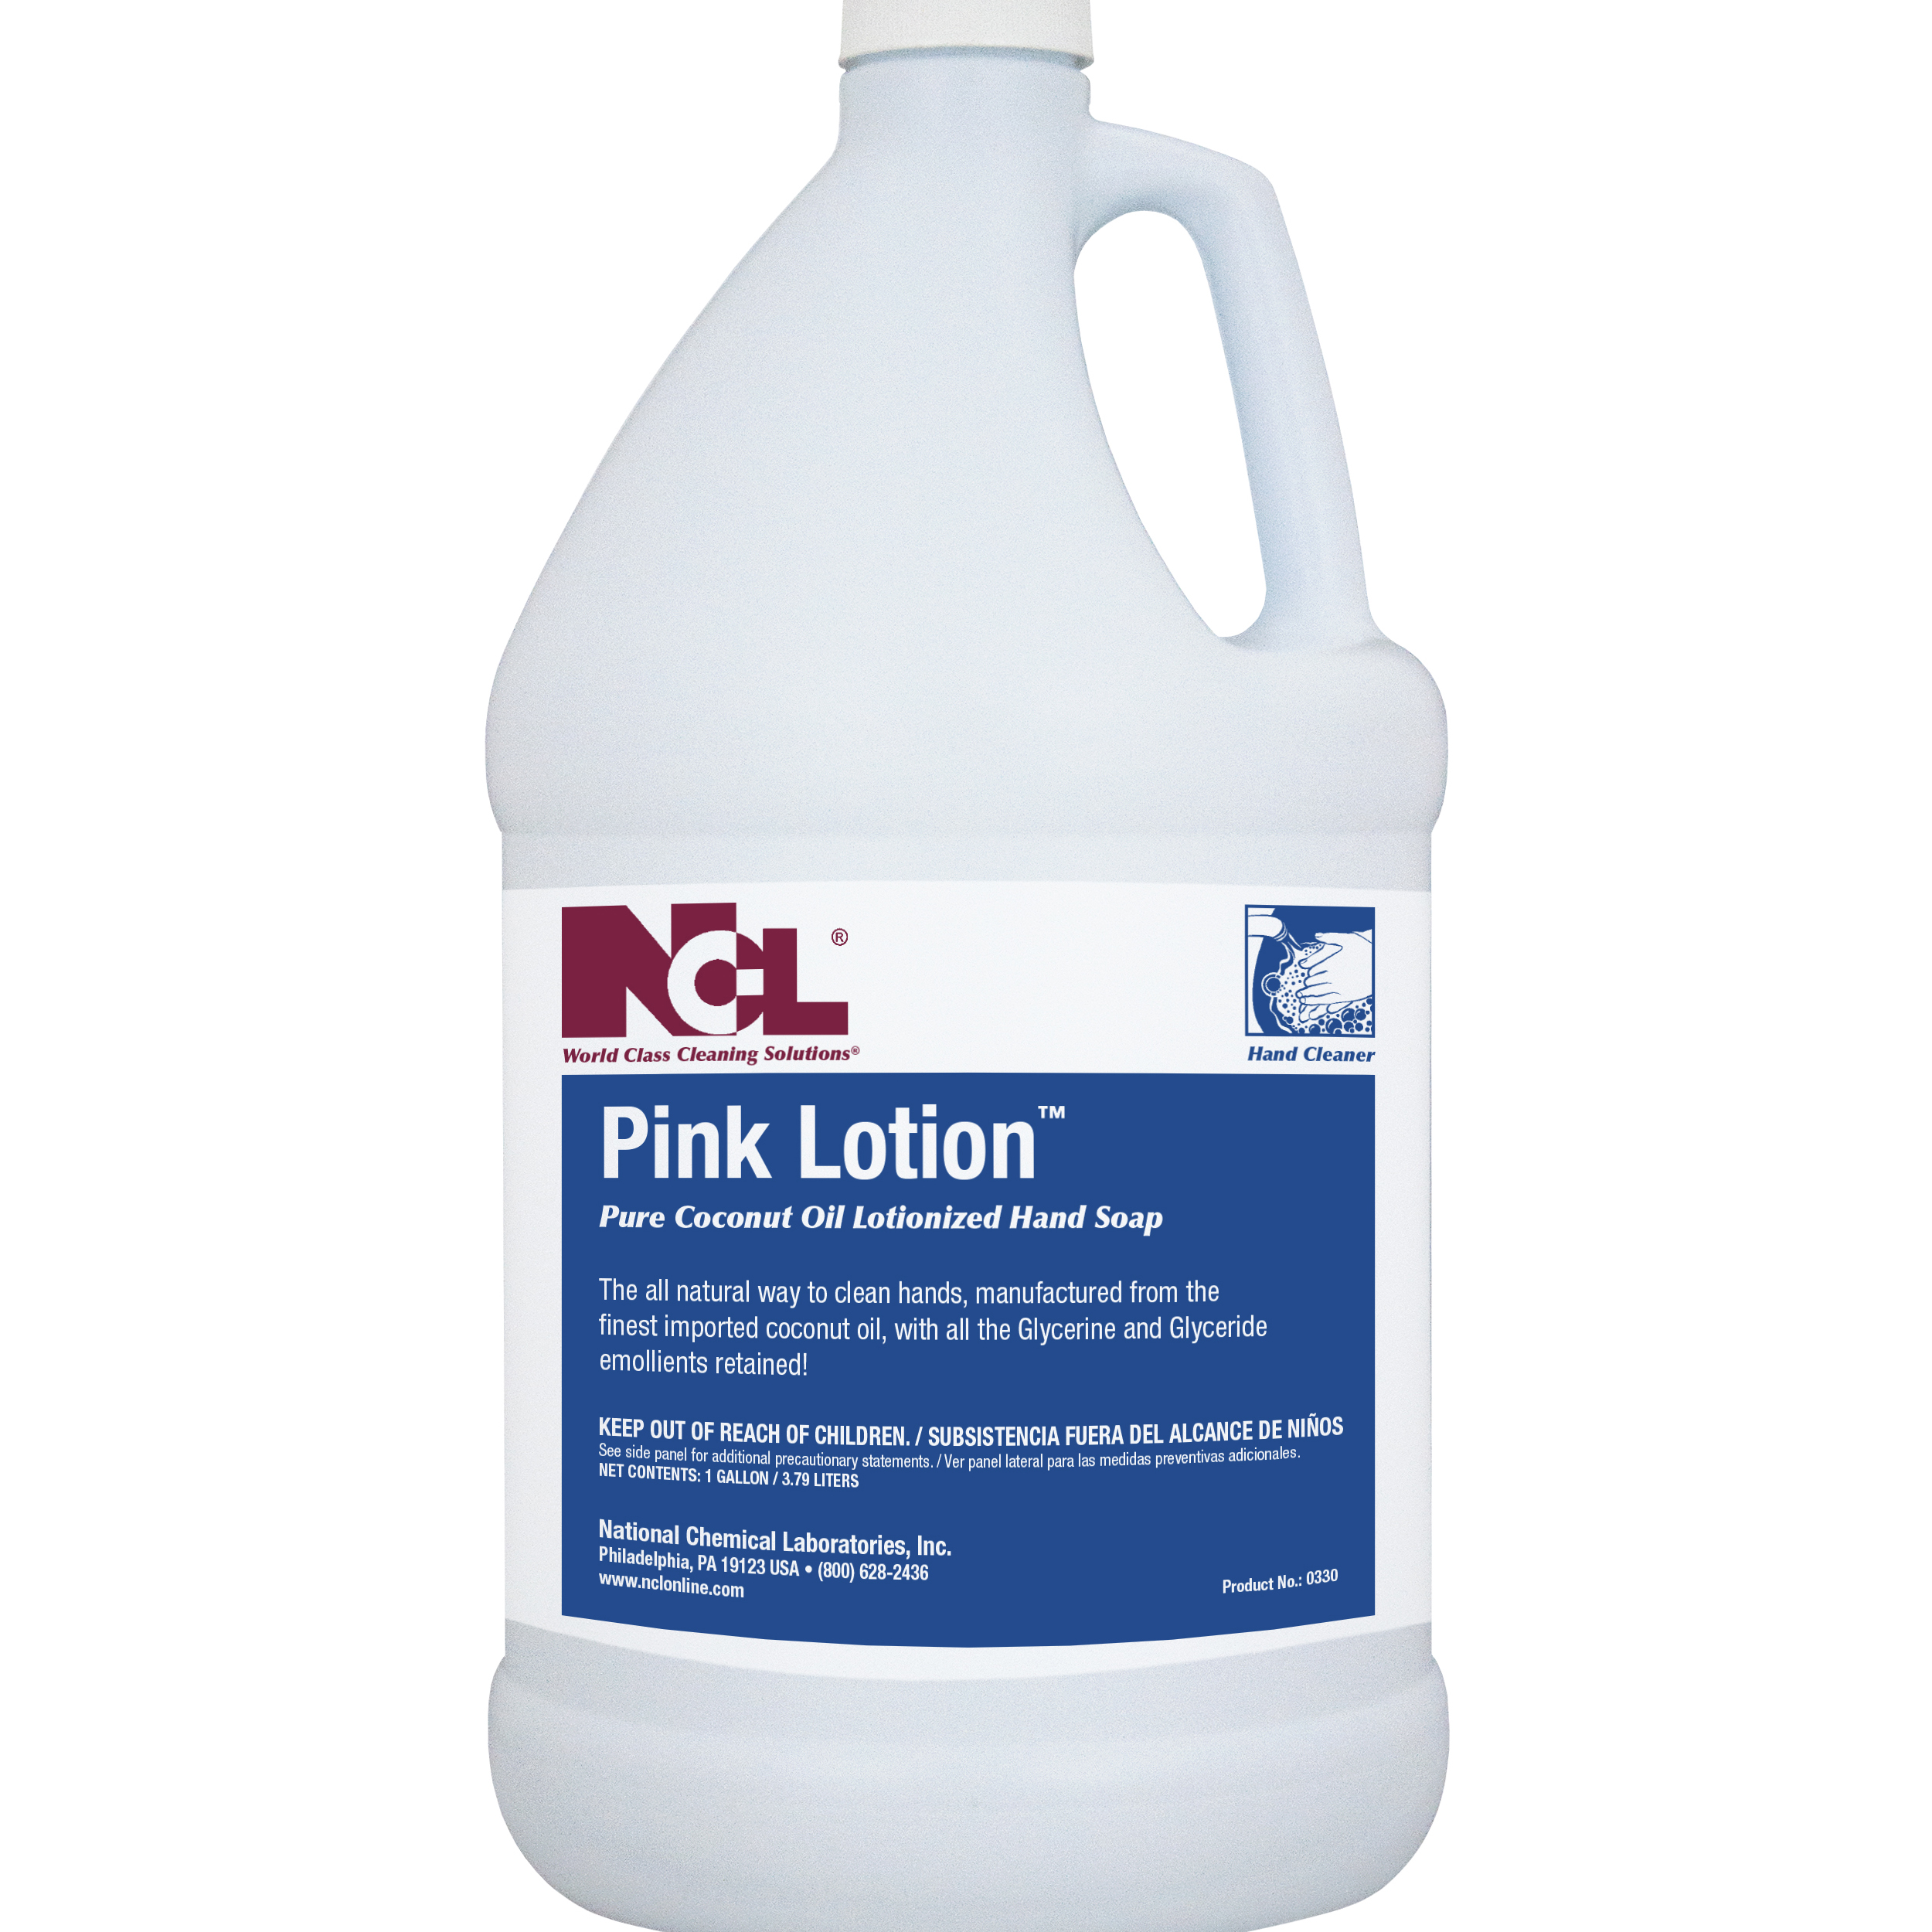  PINK LOTION Pure Coconut Oil Lotionized Hand Soap 4/1 Gal. Case (NCL0330-29) 